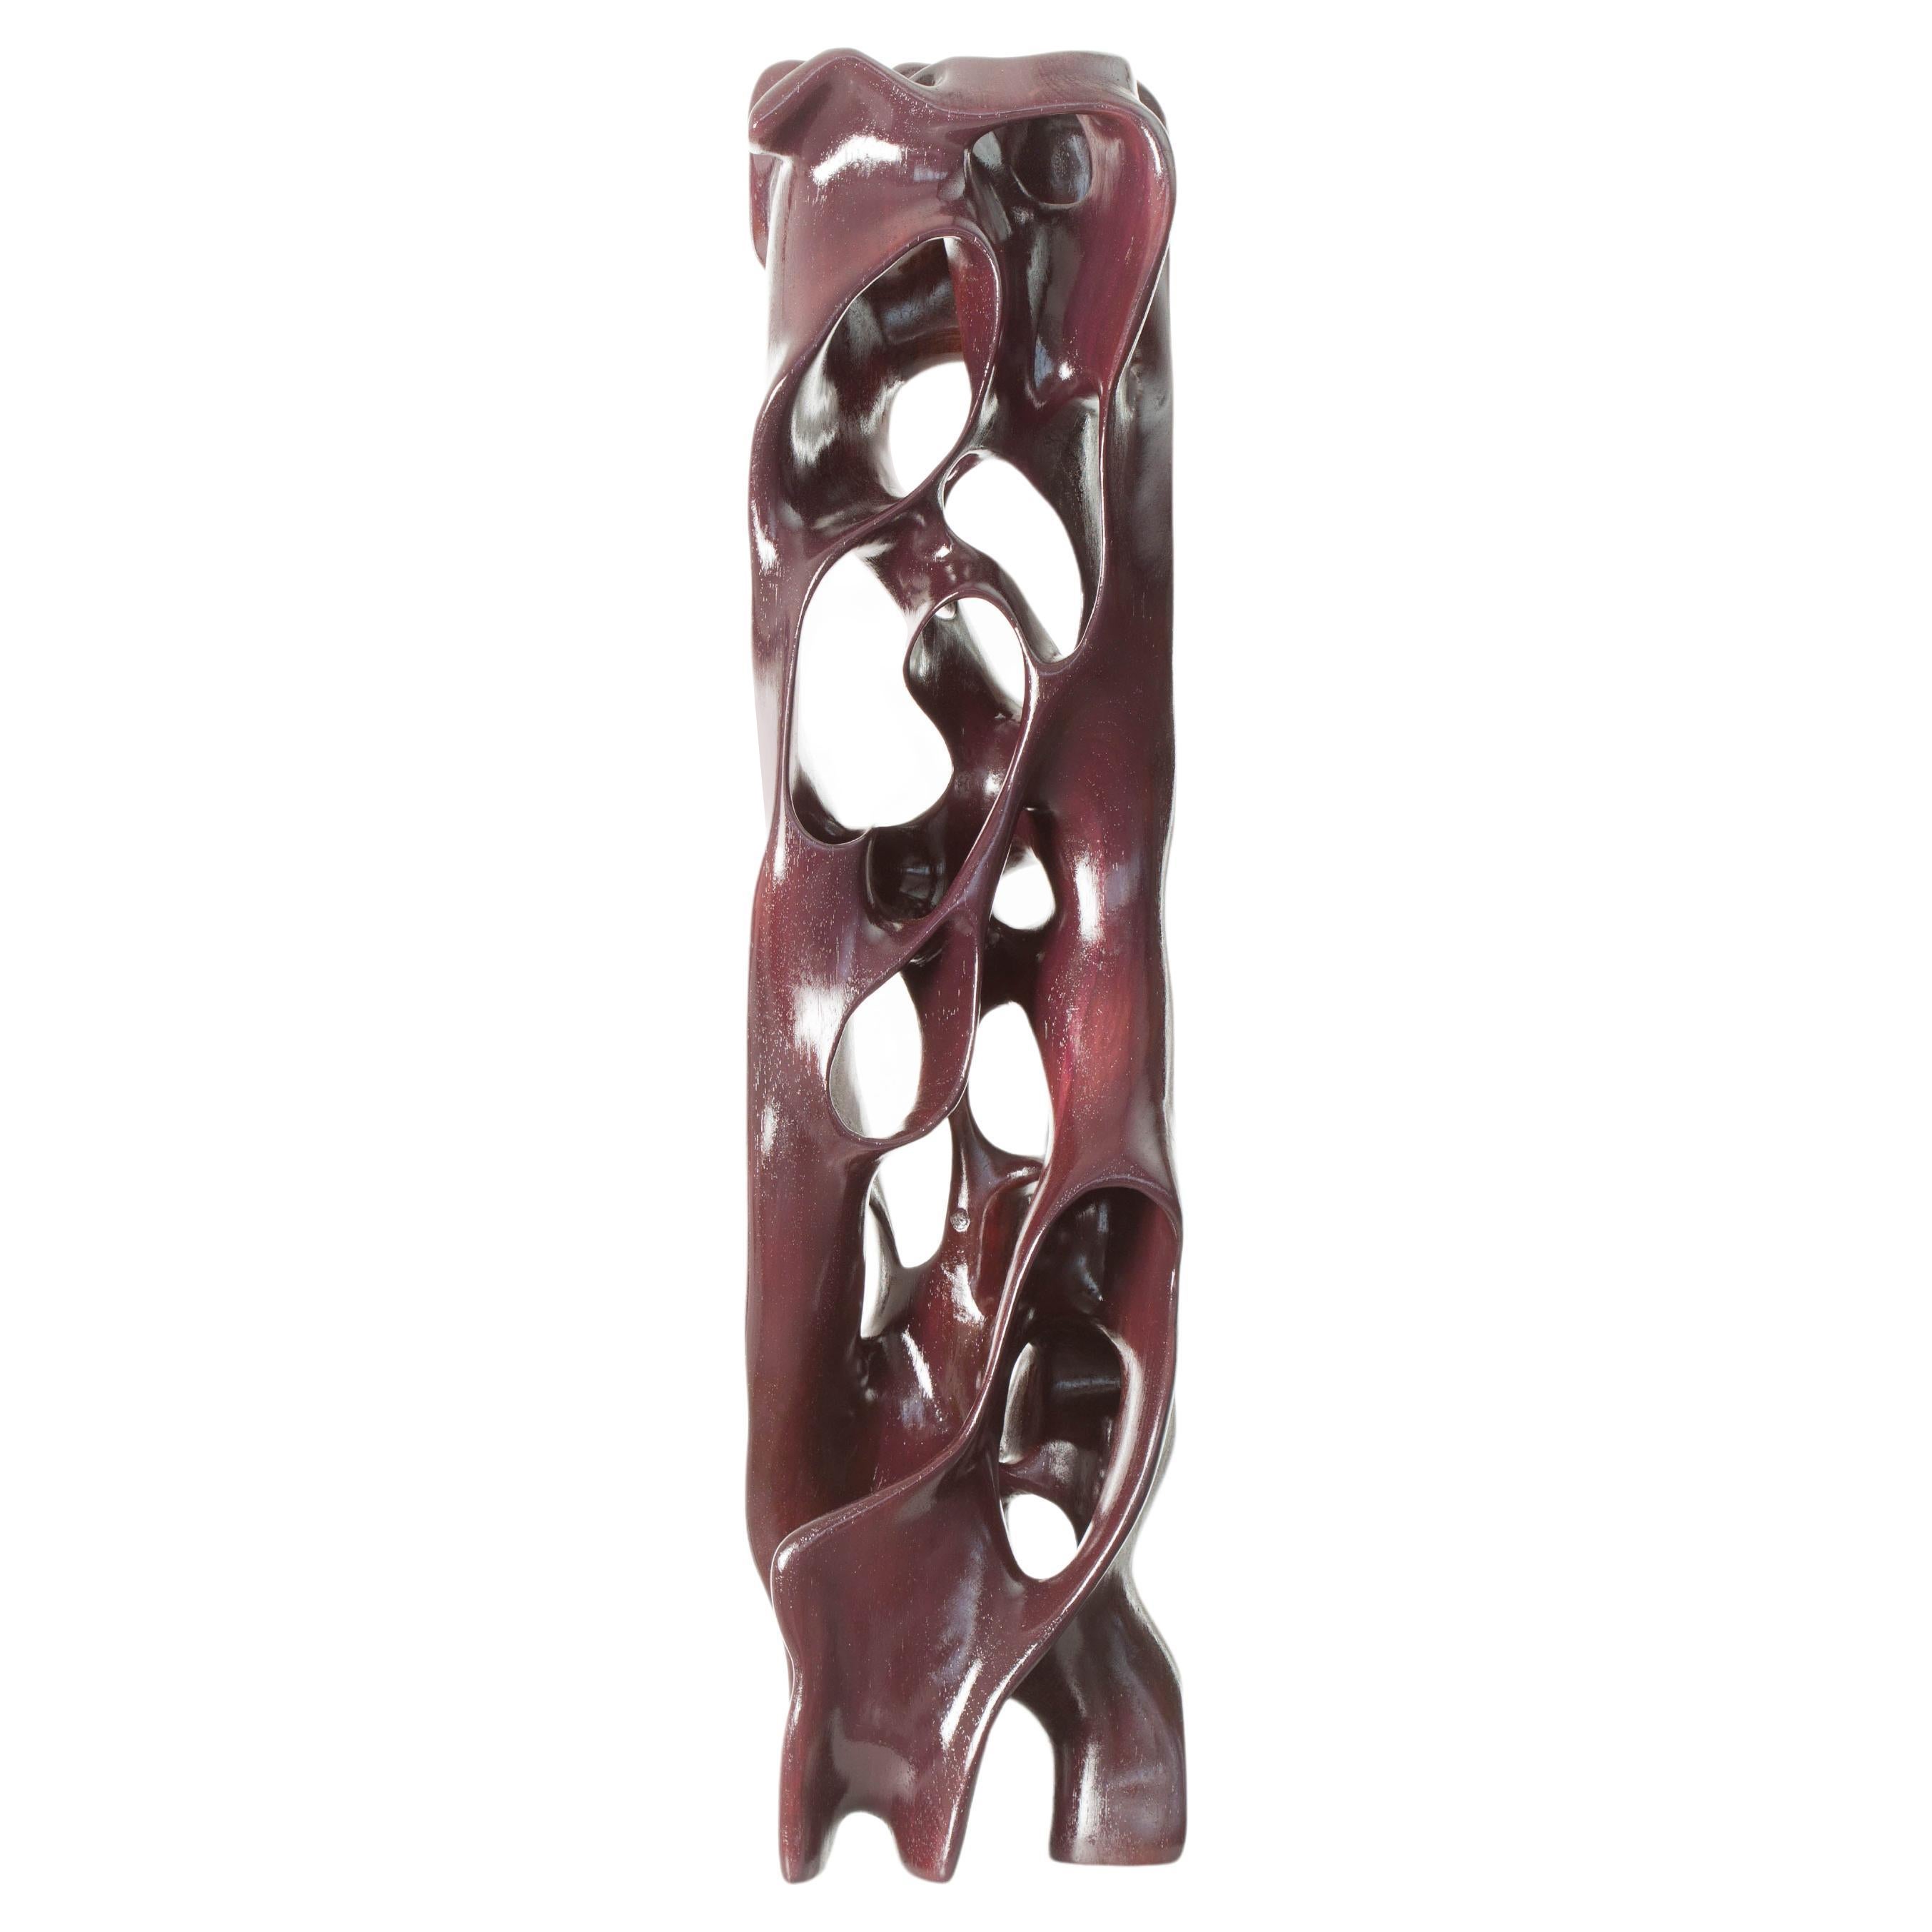 You Can Lean on Me Sculpture by Driaan Claassen For Sale